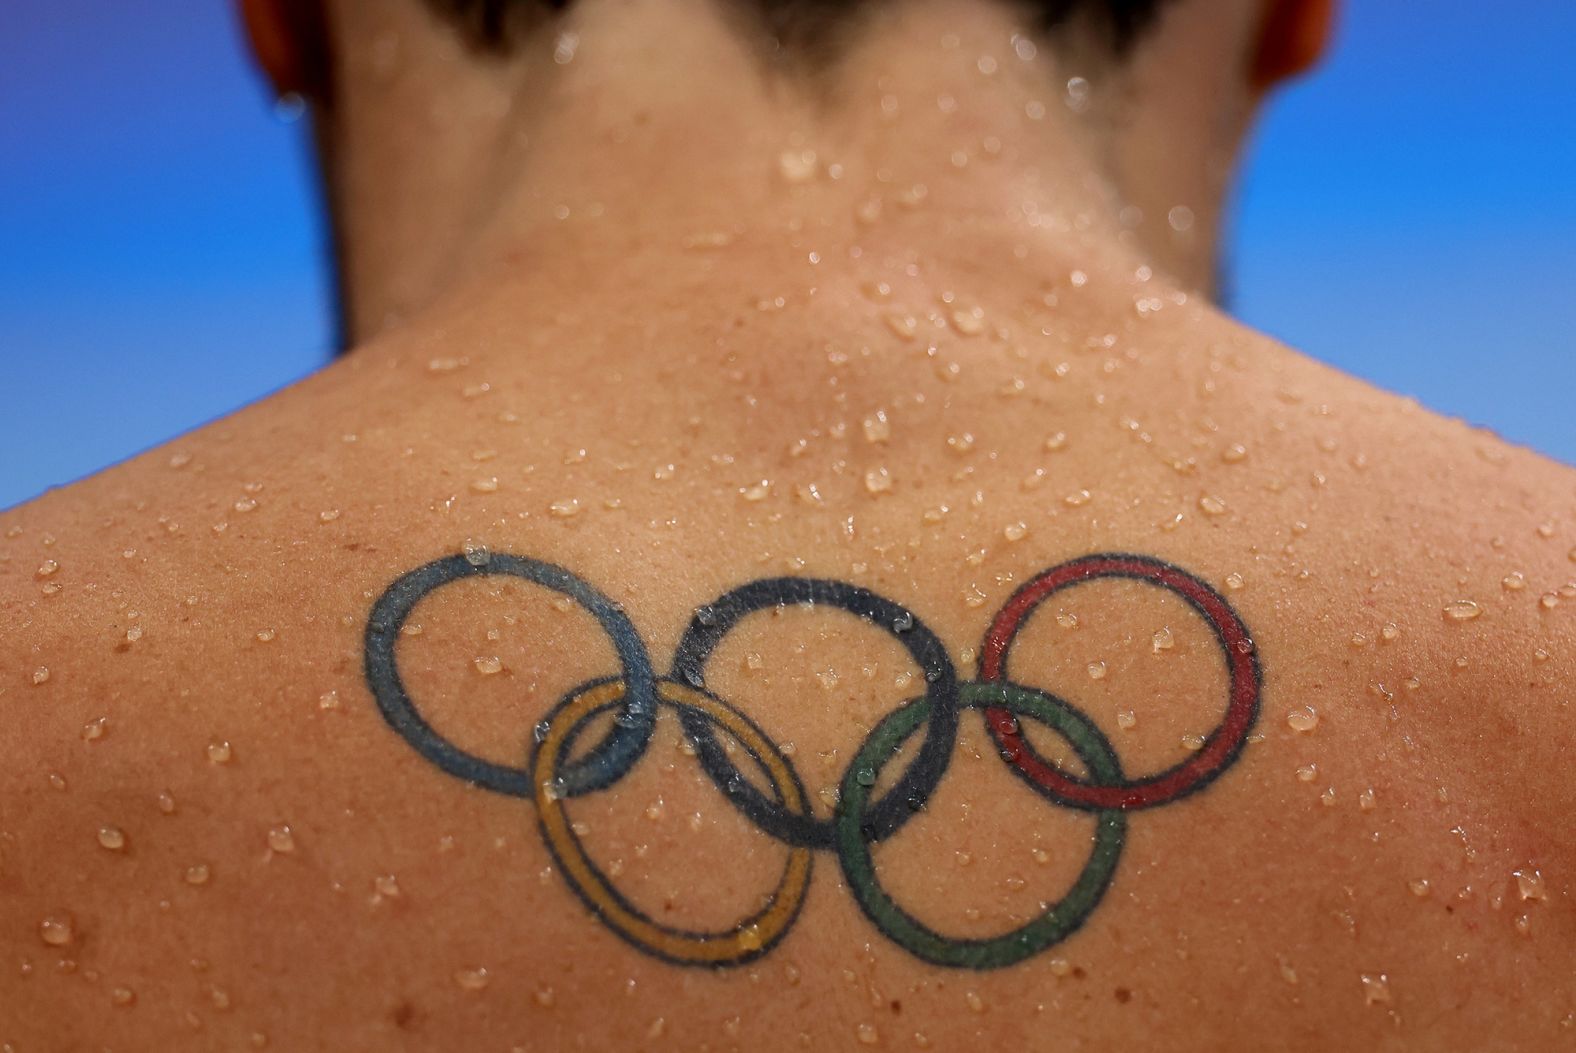 A tattoo of the Olympic rings is seen on the back of South African swimmer Brad Tandy on July 27. Many of this year's athletes <a href="index.php?page=&url=https%3A%2F%2Fwww.cnn.com%2Fstyle%2Farticle%2Folympics-tokyo-tattoos-trnd-spt%2Findex.html" target="_blank">are sporting a wide range of ink.</a>